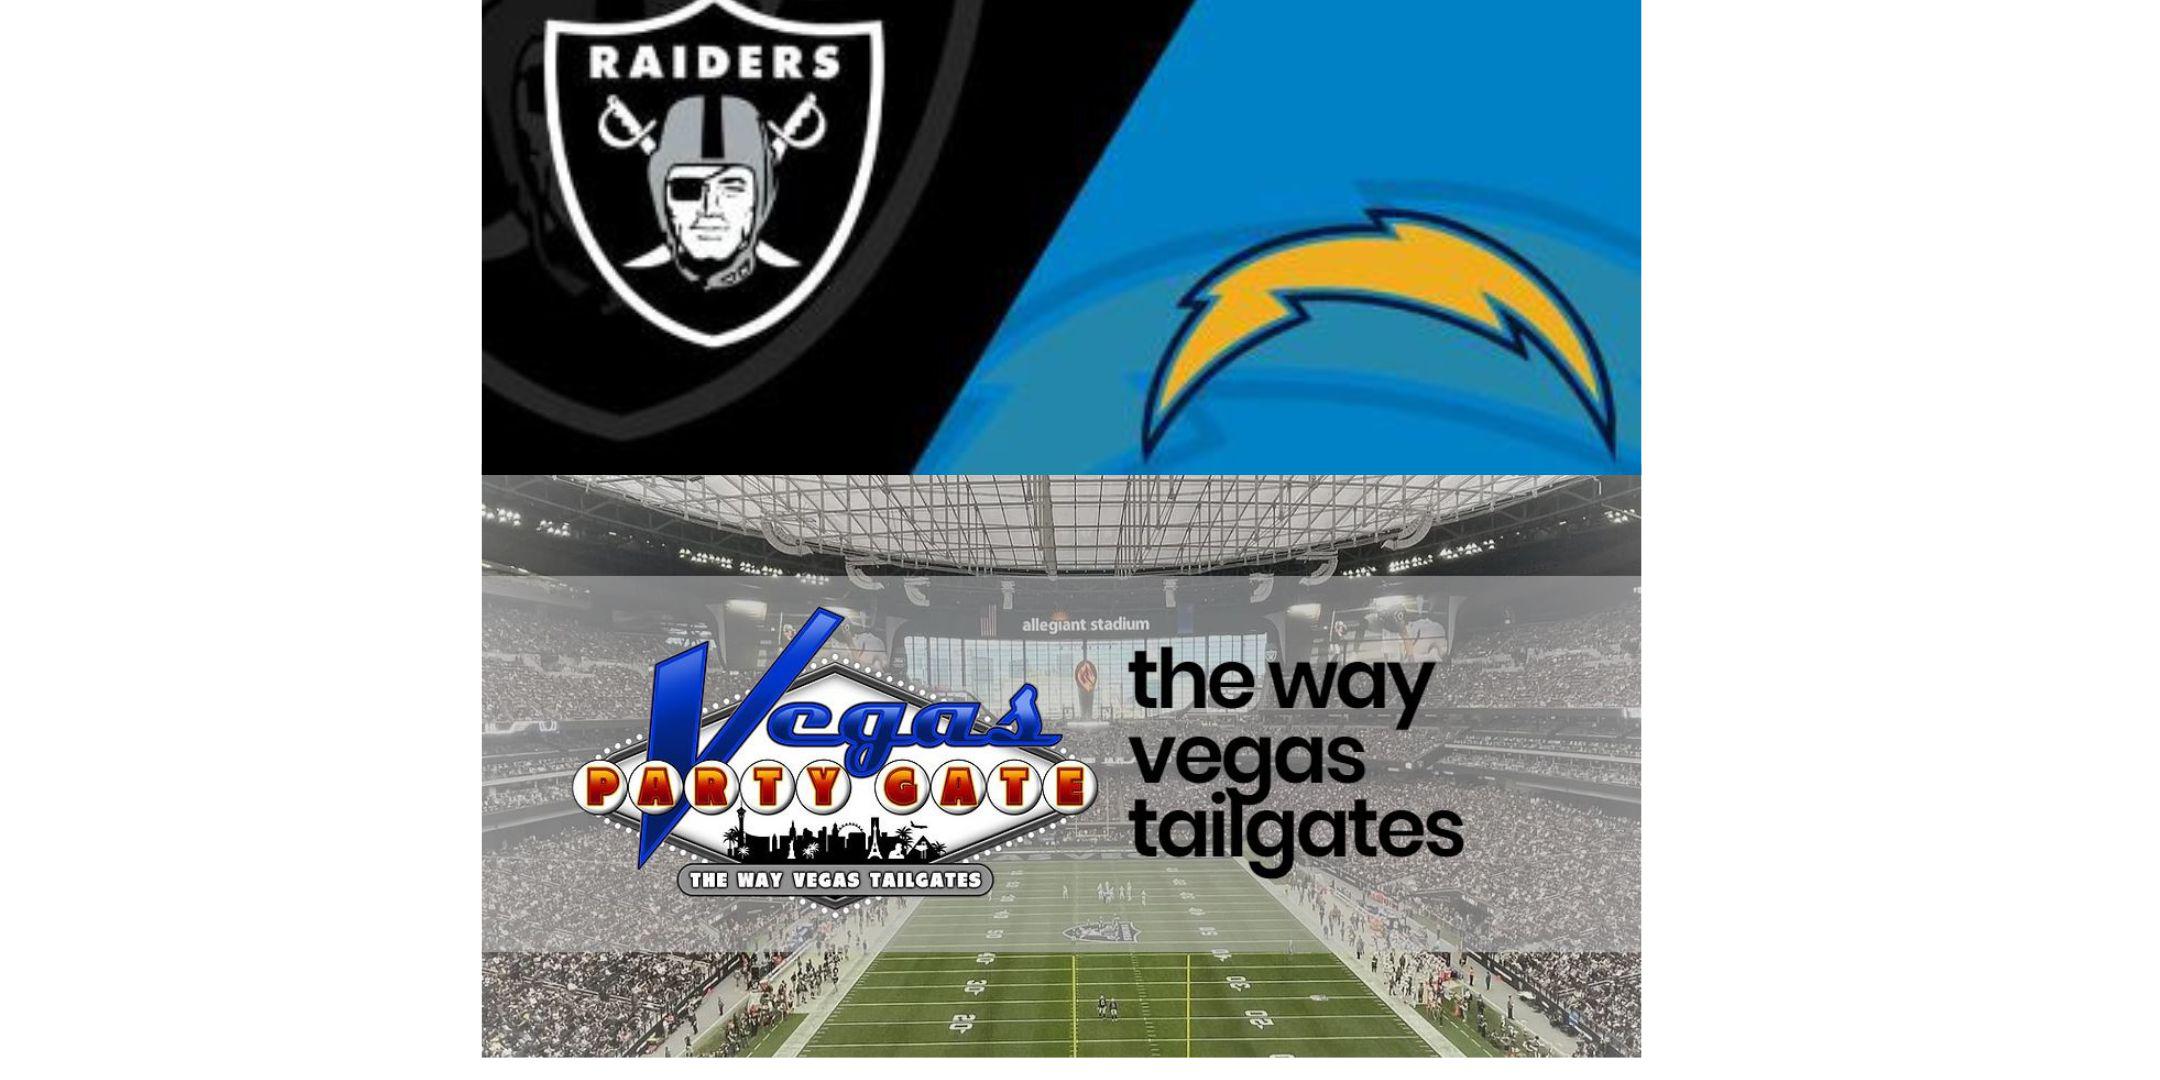 VEGAS PRE GAME TAILGATE PARTY- RAIDERS VS L A CHARGERS Tickets